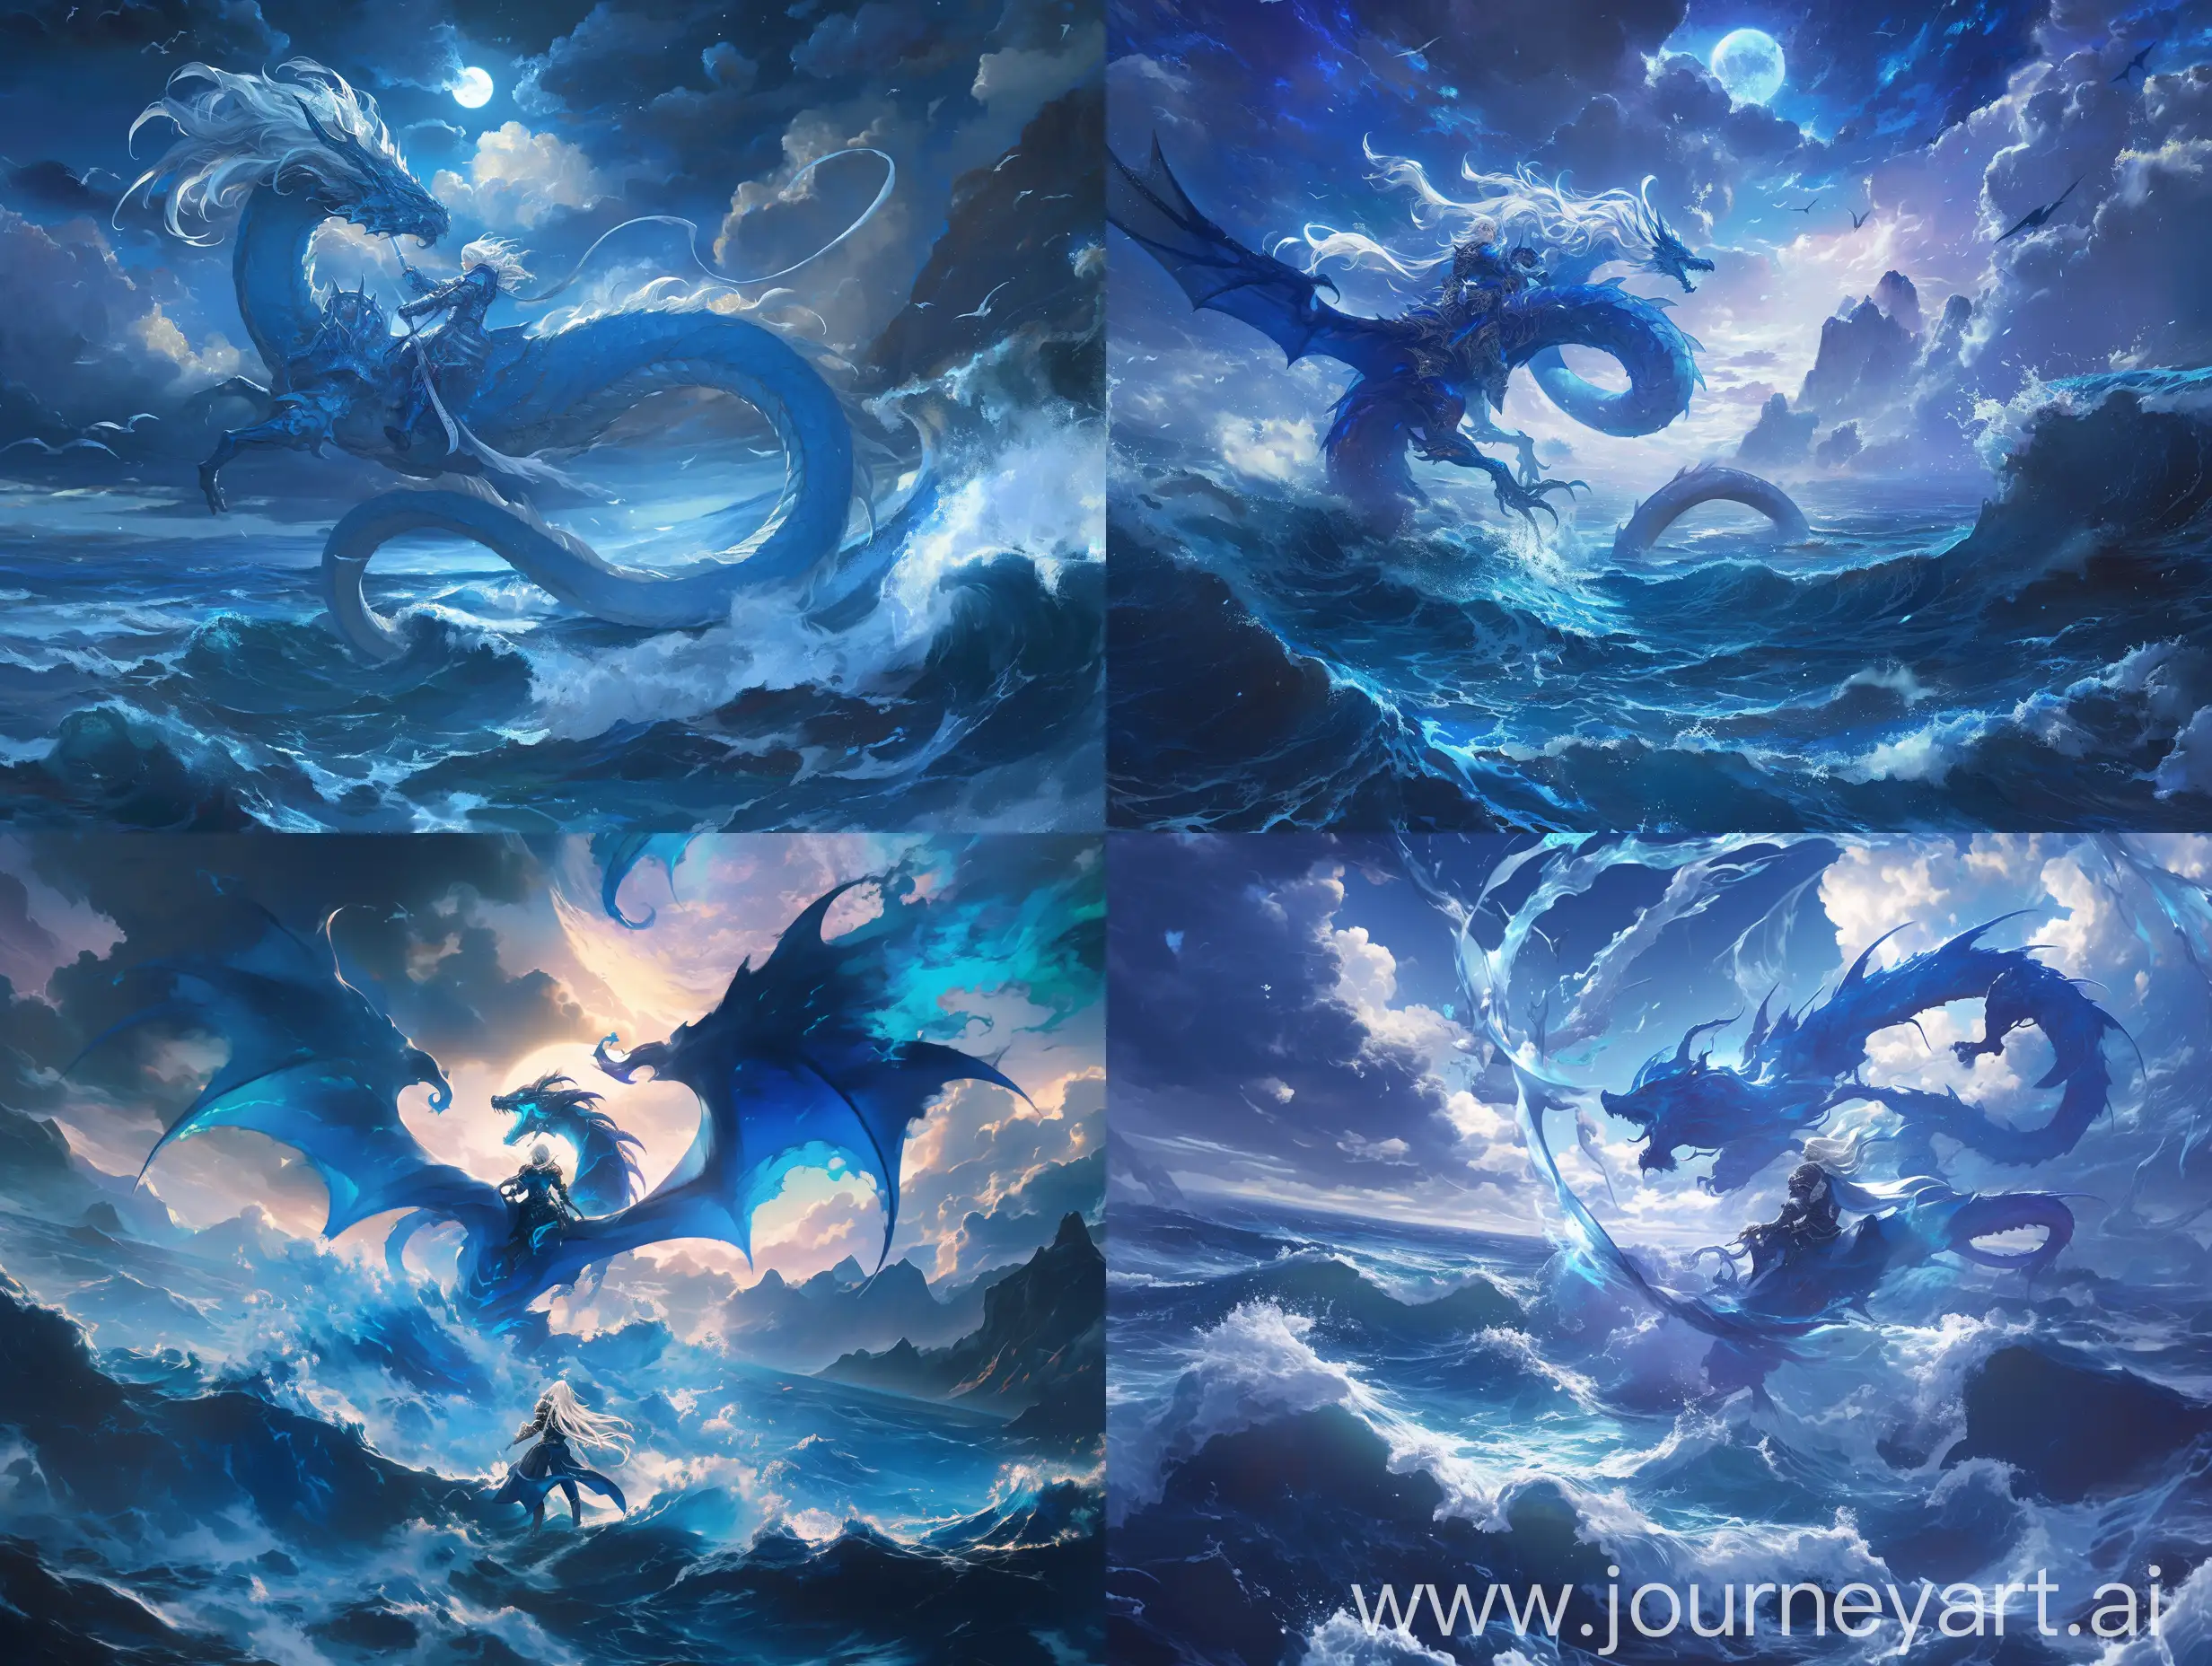 subject: white-haired warrior, blue dragon environment: rough sea, rolling waves, huge water column, Dark Sky medium&Styles: Fantasy Colors, Dynamic, Rich colors, From dark blue to light blue to white lighting&Color: dynamic, Rich colors, From dark blue to light blue to white, A sharp contrast PointOfView&Composition: the white-haired warrior and the blue dragon are in the center of the screen, Surrounded by waves and water jets, Cloudy sky as background. In the whirlpool of the storm, White-haired warrior rides blue dragon, Soar above the waves. Adopt a centrally symmetrical layout, Swirling clouds intertwined with lines of waves, moonlight pouring, Create dreamy tones from cool blue to deep purple, Emphasize the contrast of light and shadow. Detailed textures show armor flash, dragon scales and foam, A fantasy world that embodies the ultimate details and grandeur. --ar 4:3 --niji 6